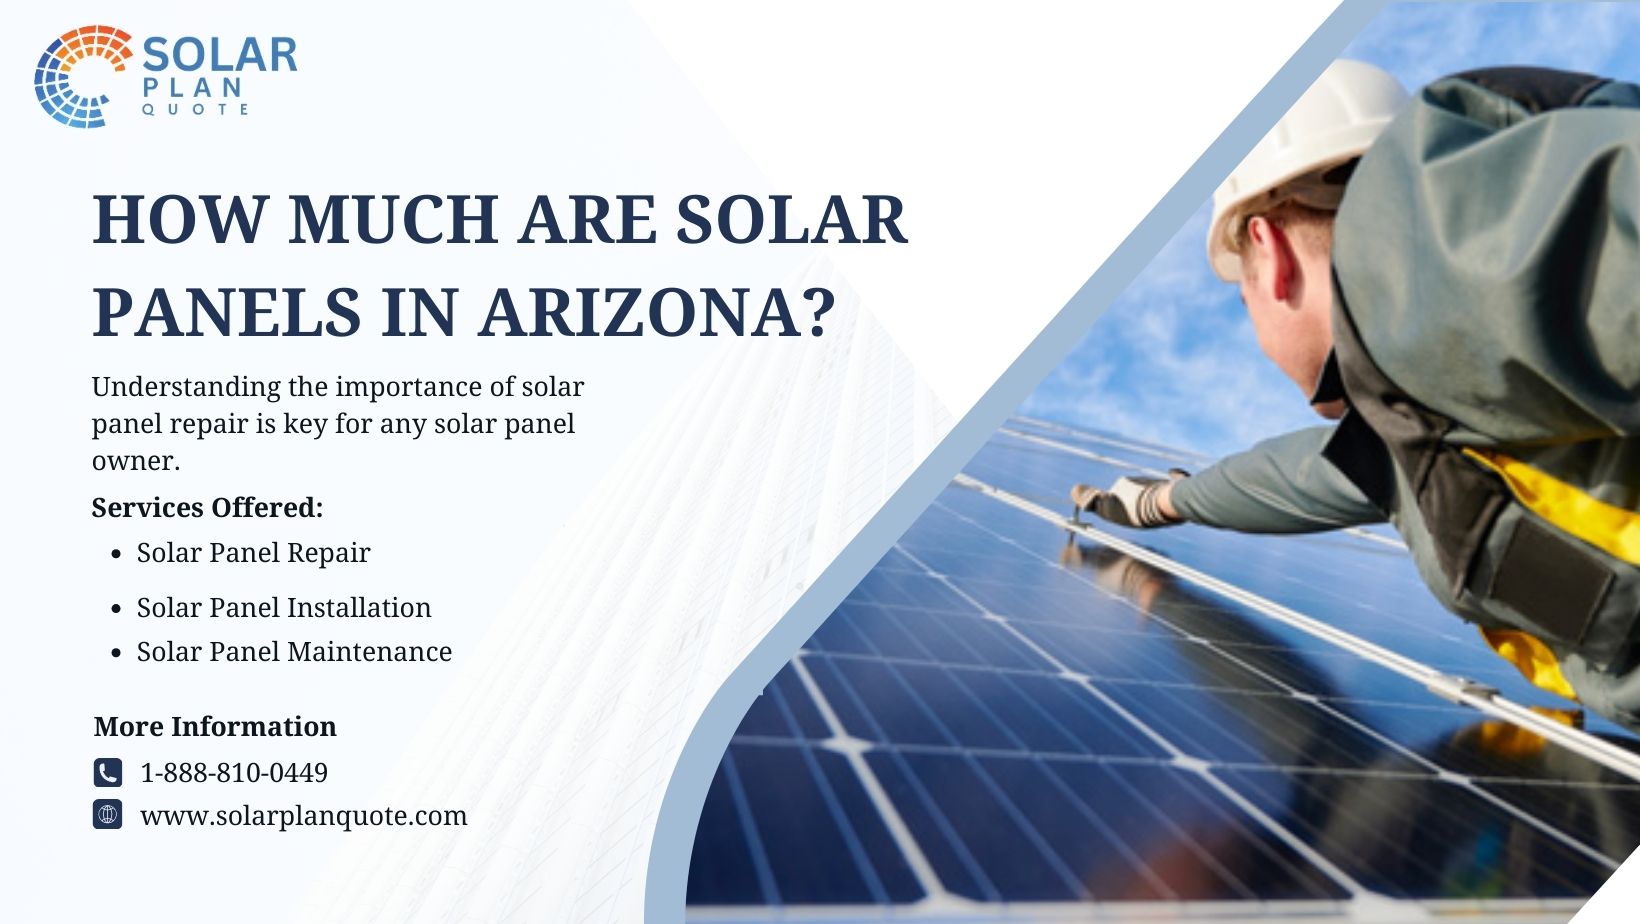 How Much Are Solar Panels in Arizona?